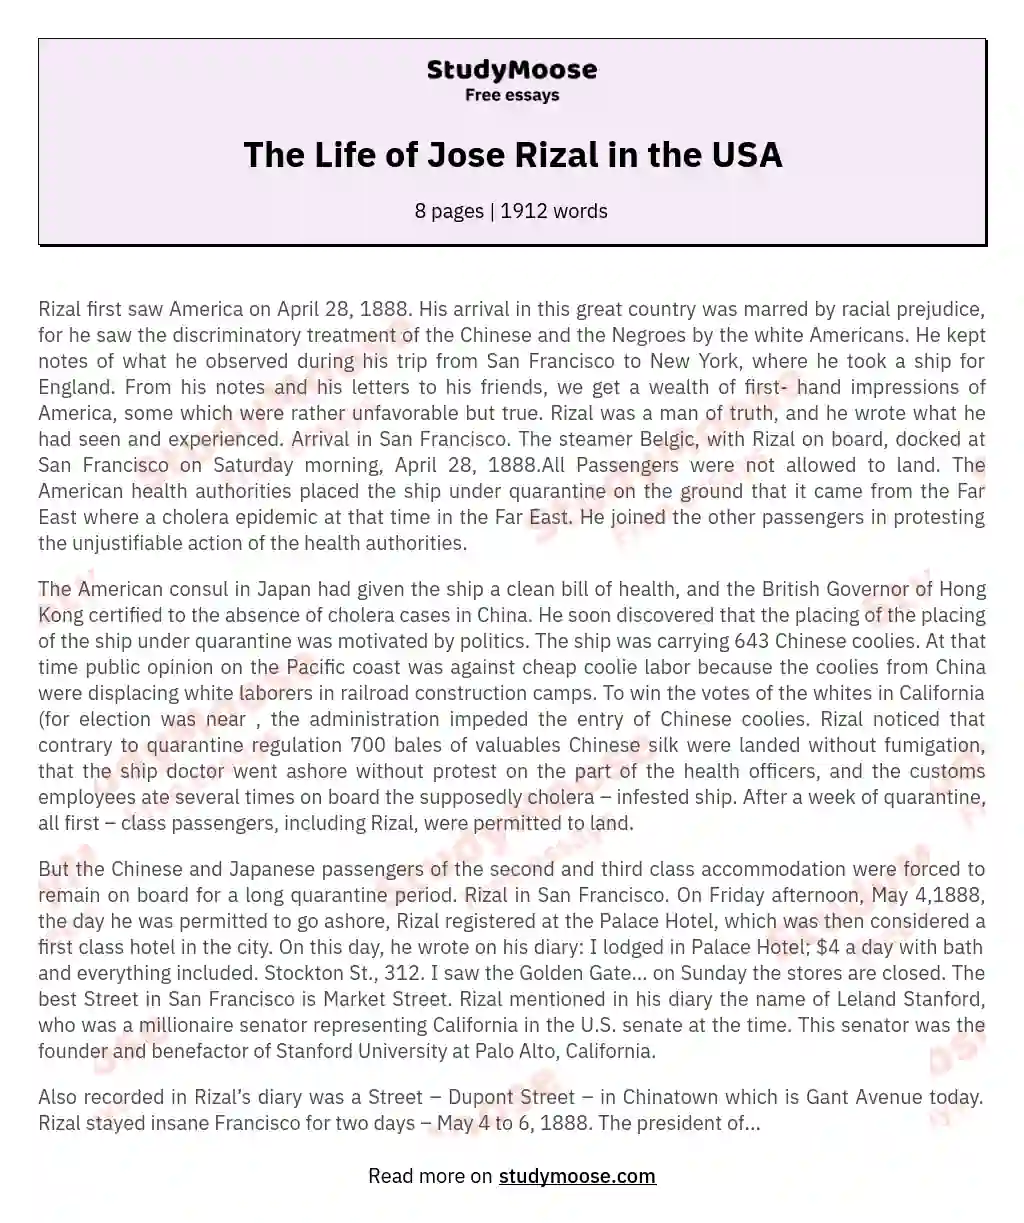 The Life of Jose Rizal in the USA essay